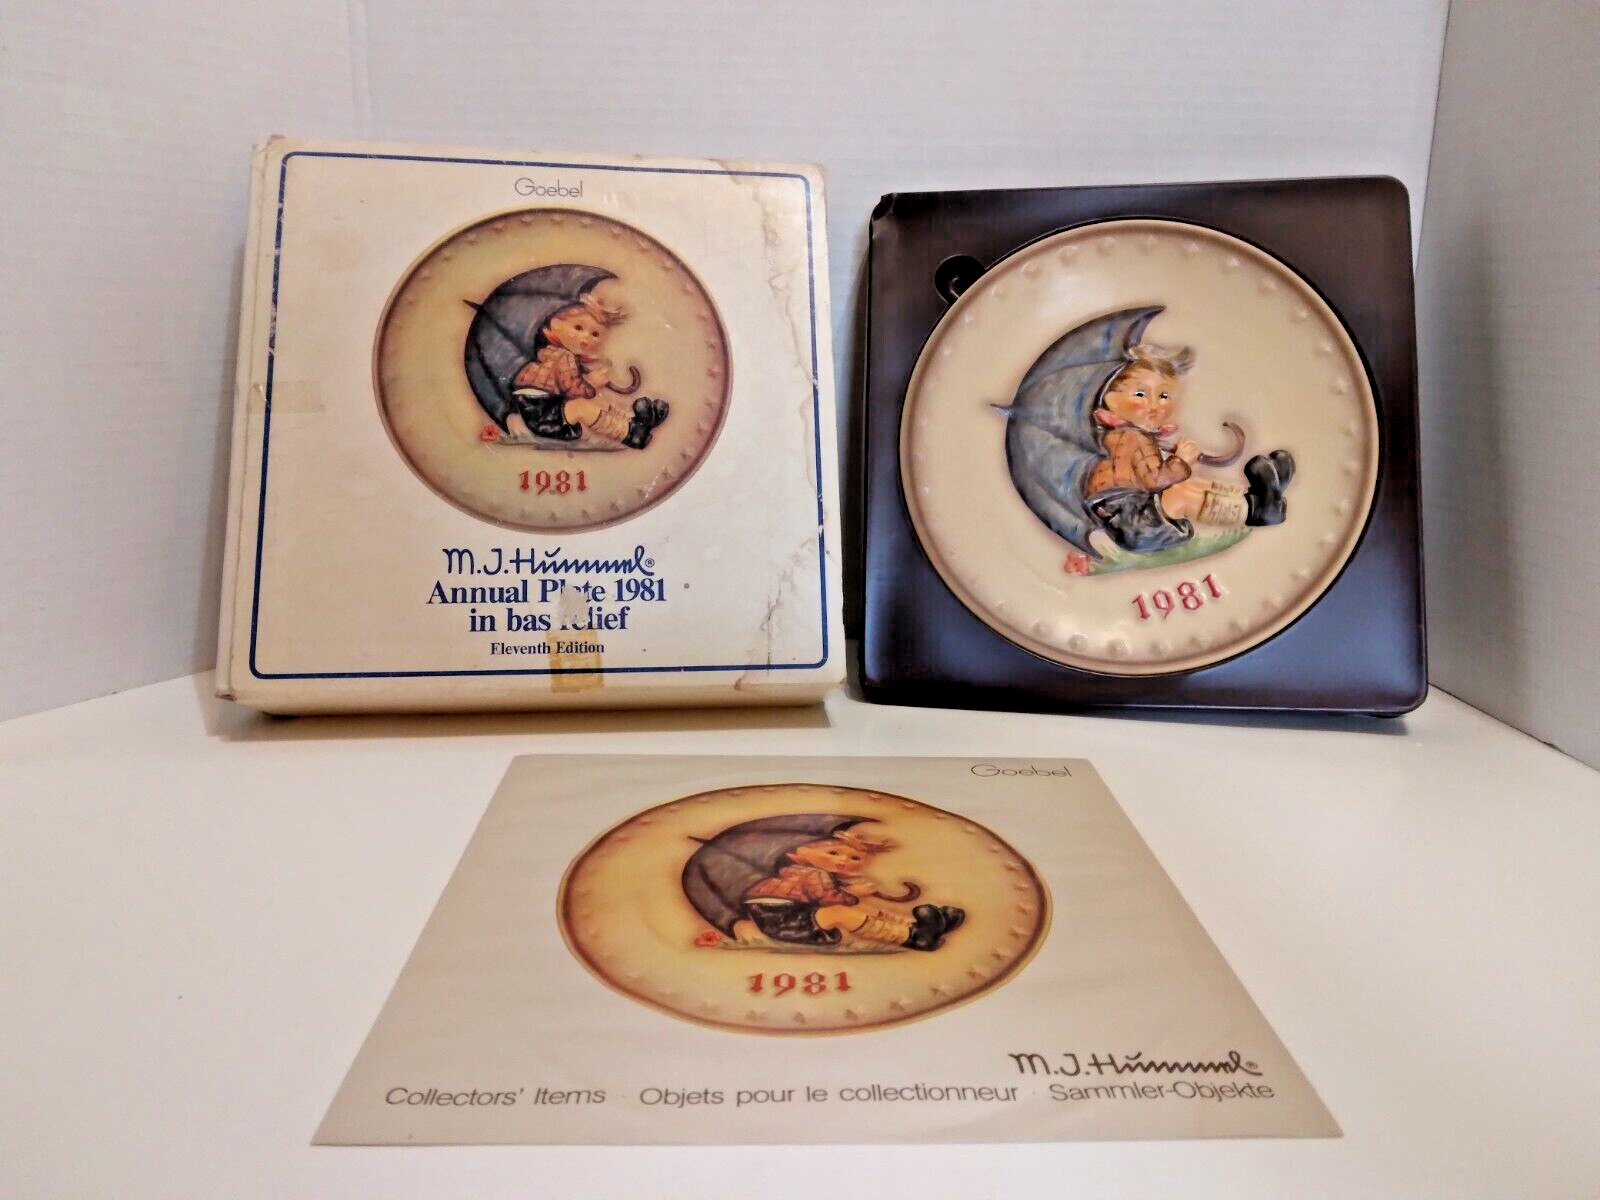 Vintage 1981 Hummel Annual Porcelain Plate in Box with Insert